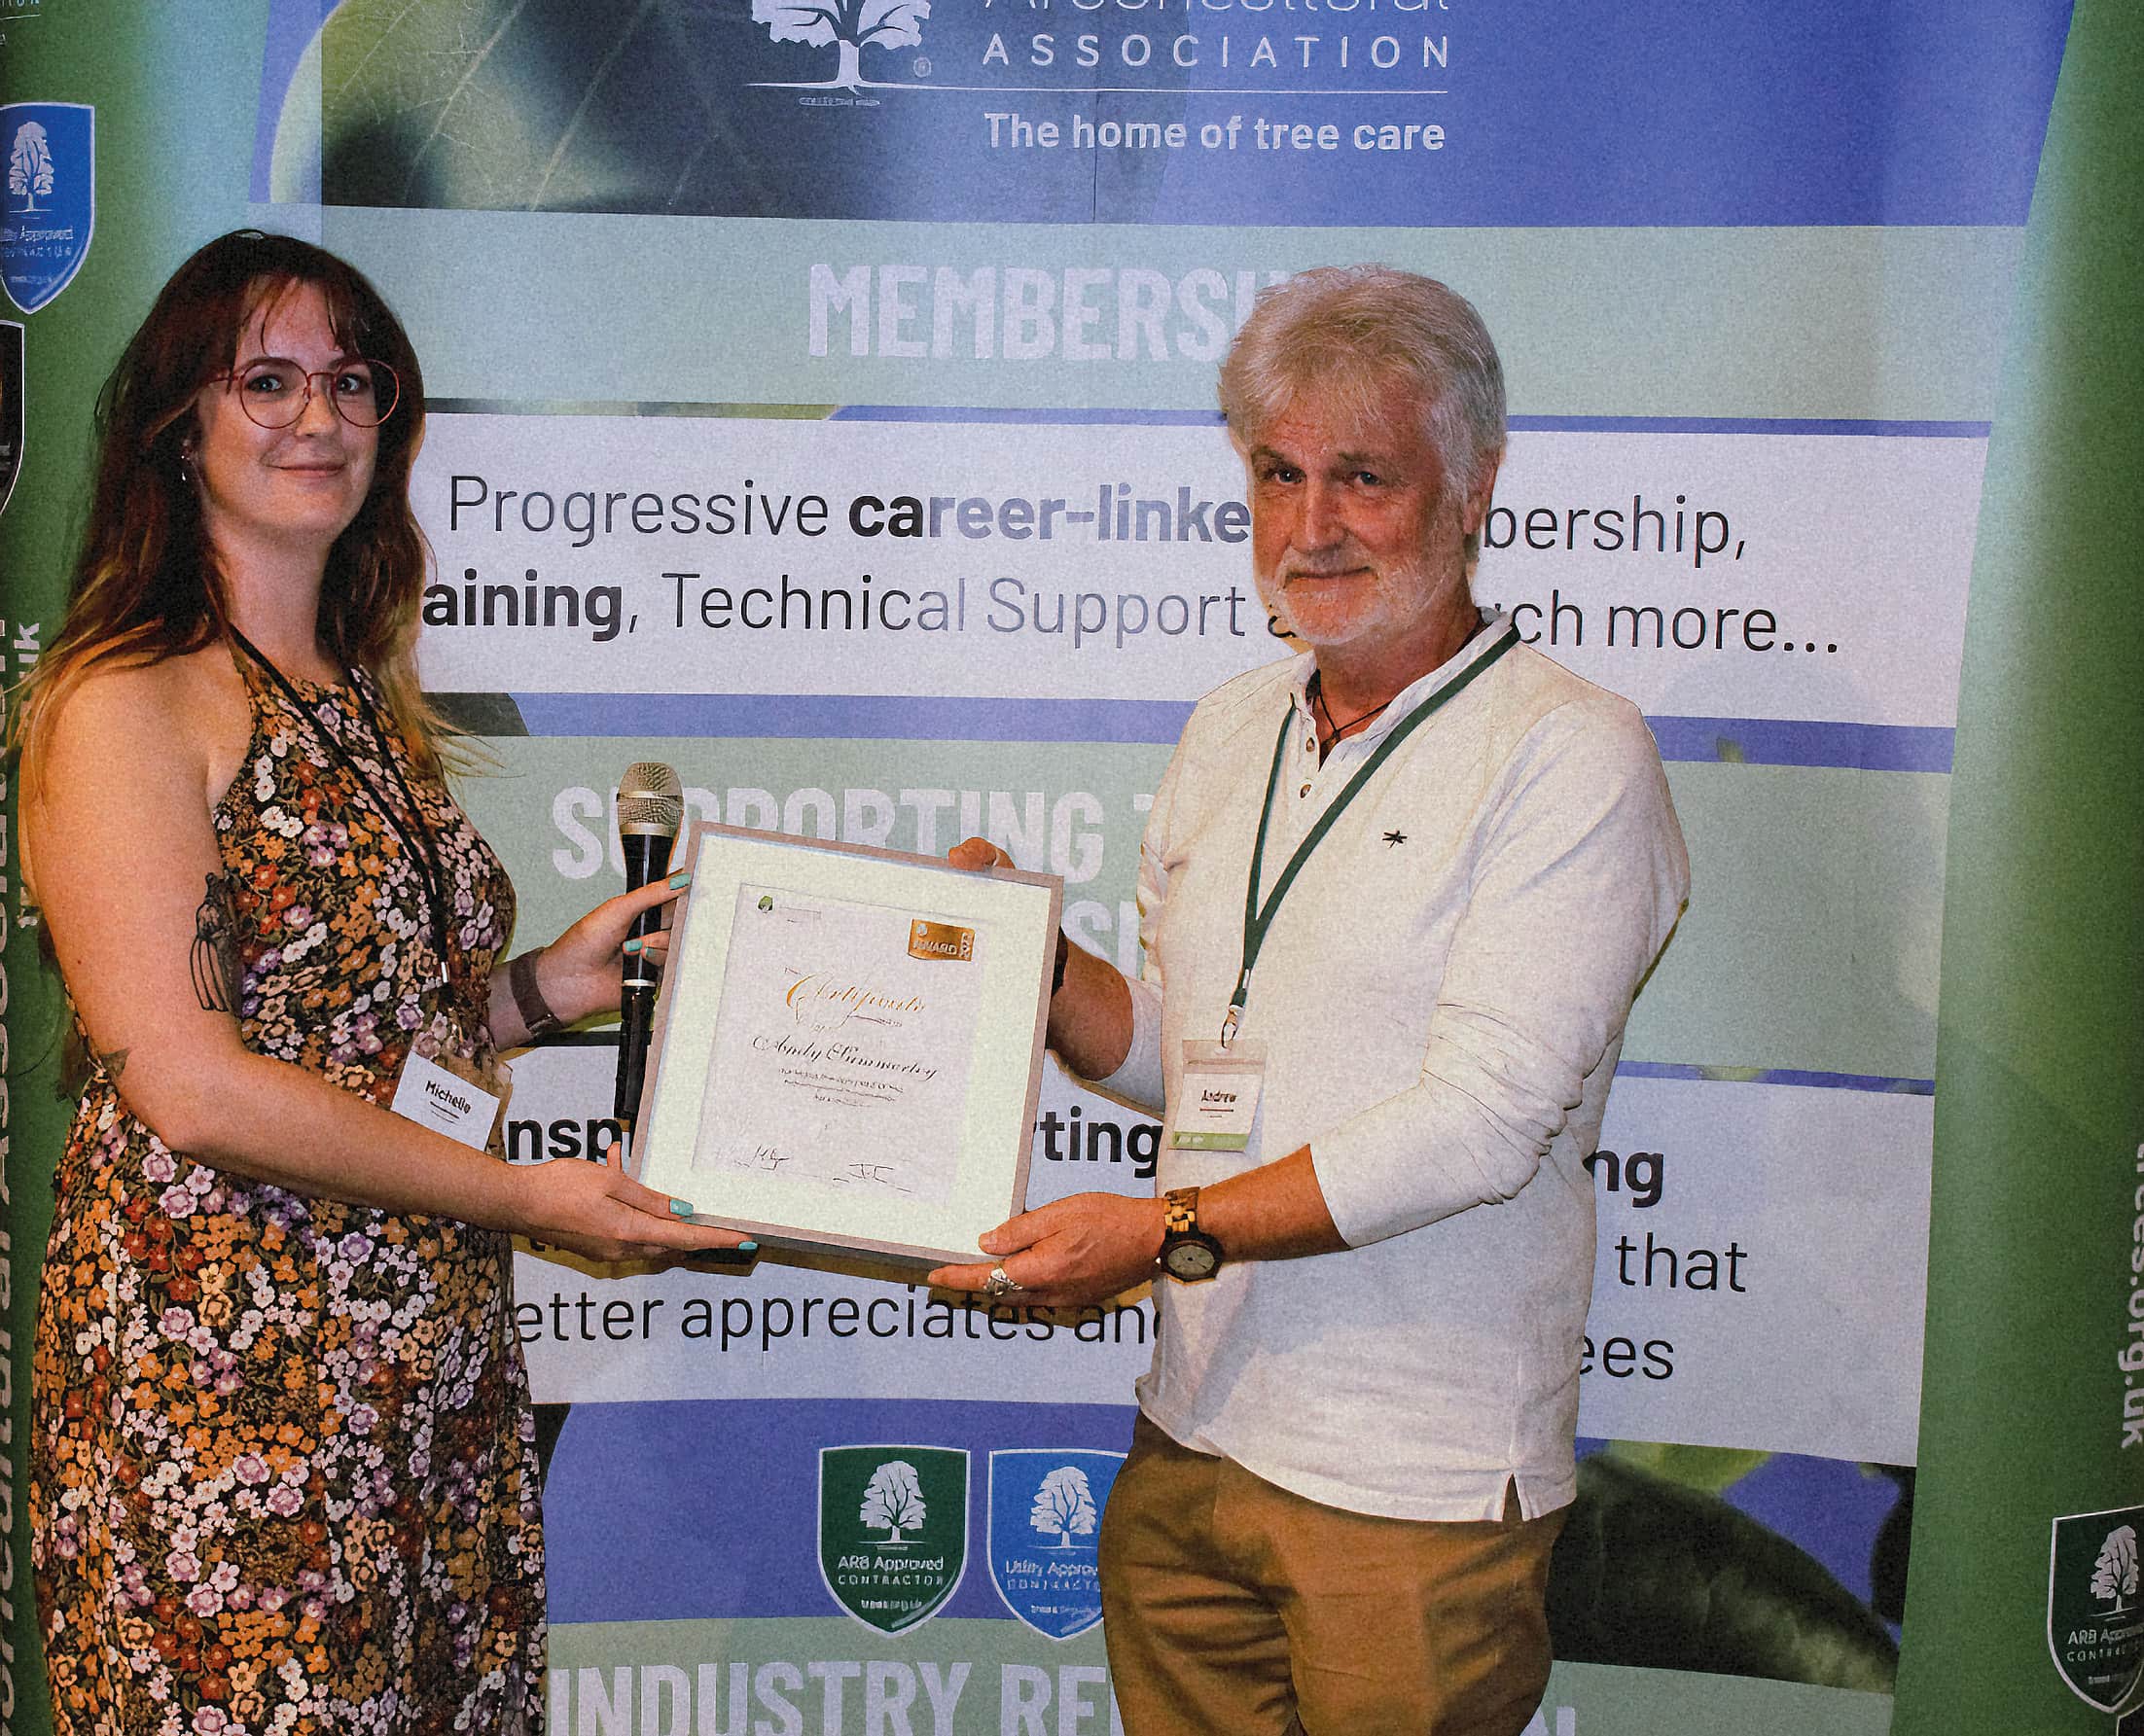 Michelle Ryan, Association Chair, presents Andy Summerley  with the Arboricultural Association Award